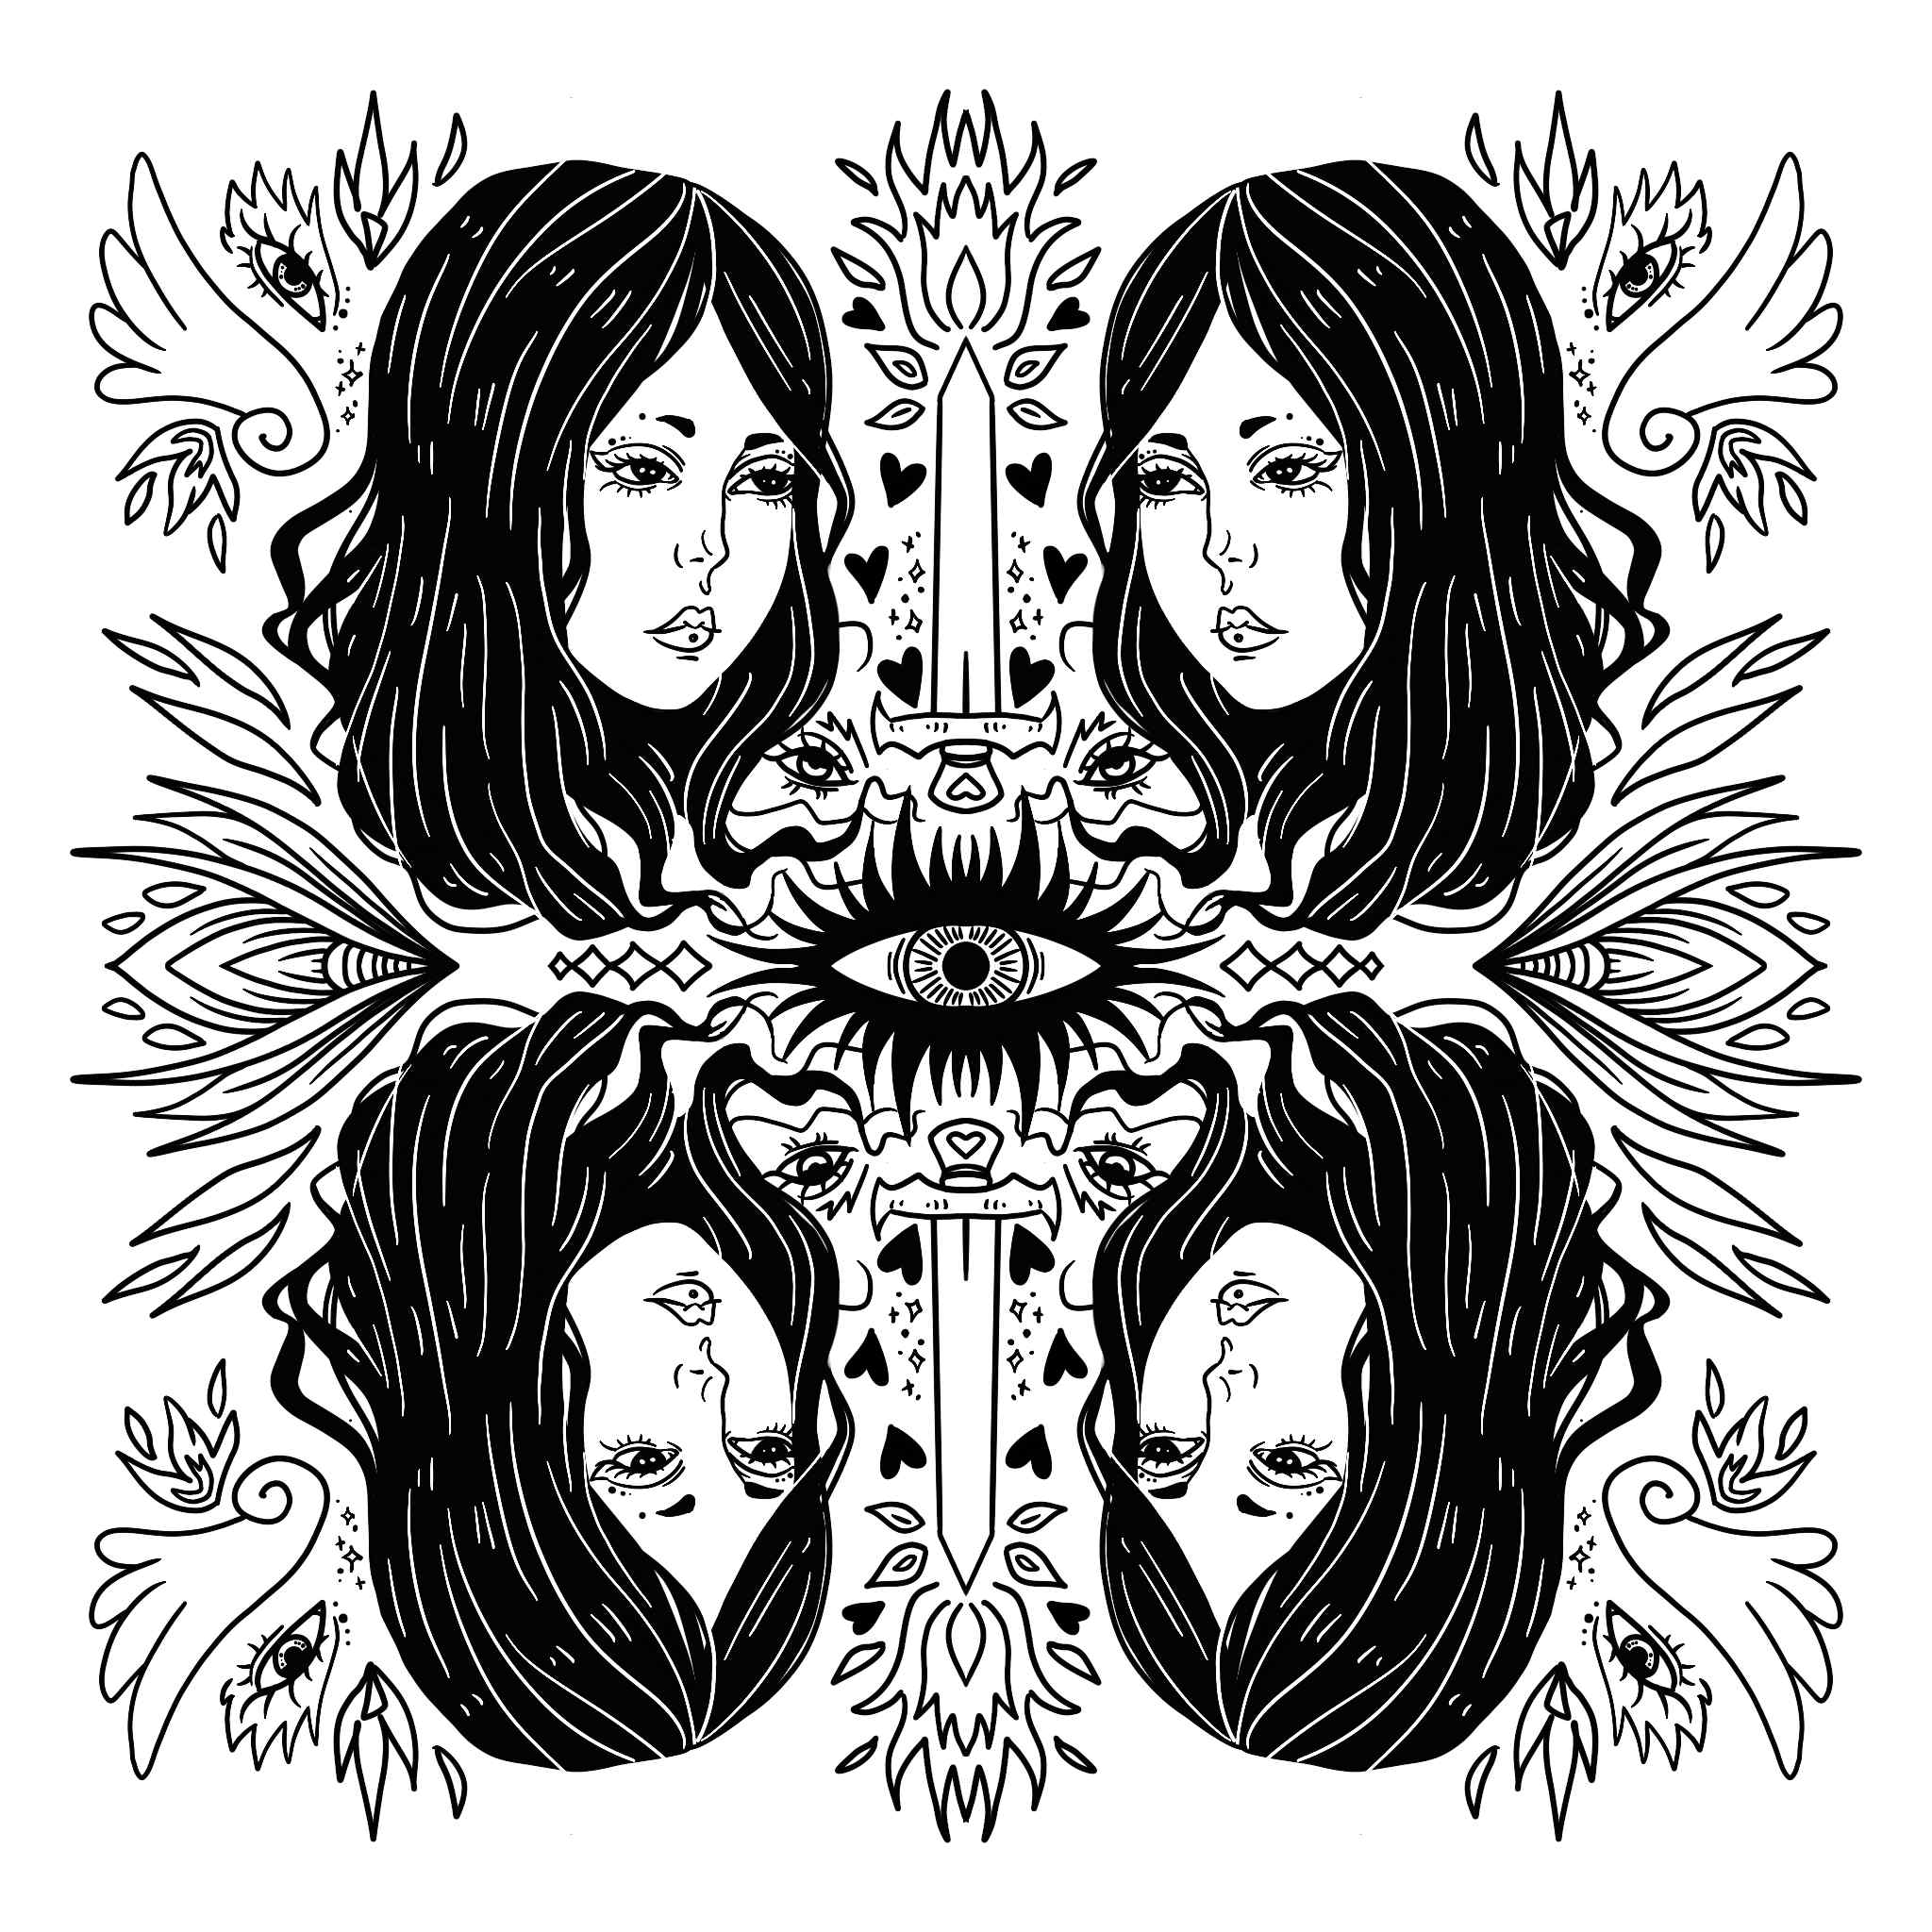 digital 4 way symmetrical ink drawing of a girl with black hair, swords, wings, and eyes.